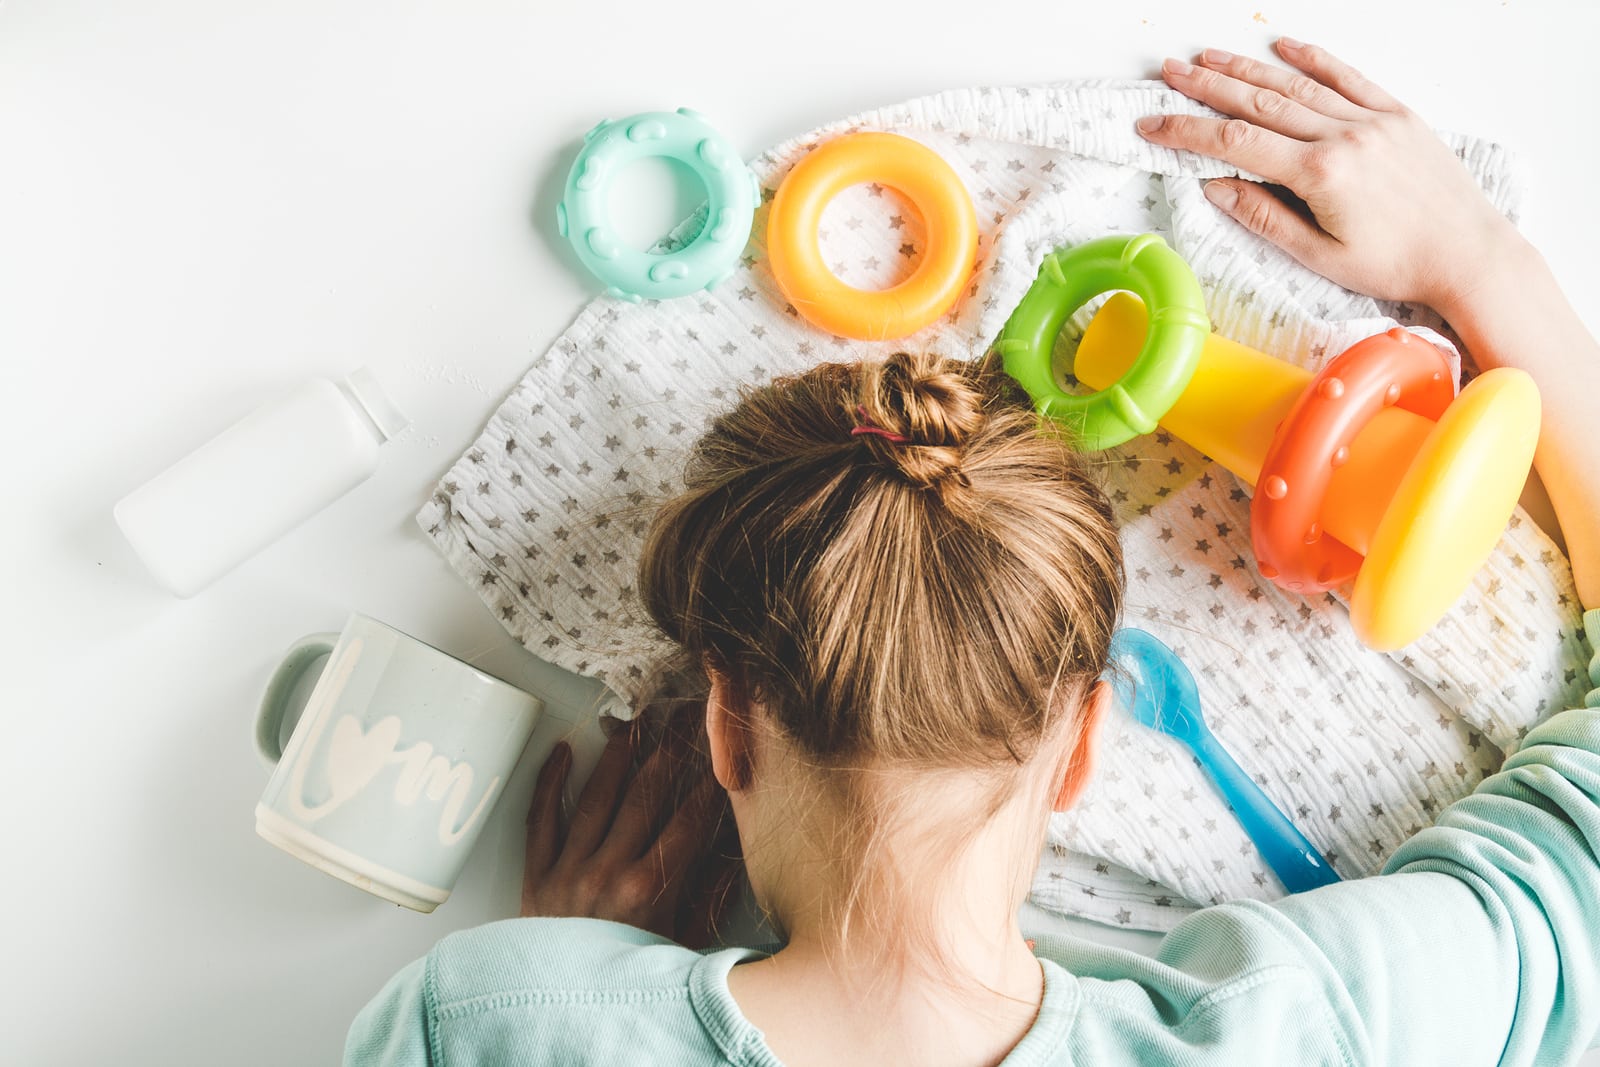 Exhaustion seems to go hand-in-hand with motherhood. But does it feel like you can never catch up on enough sleep or have enough energy? Here's what all moms should know about chronic exhaustion.